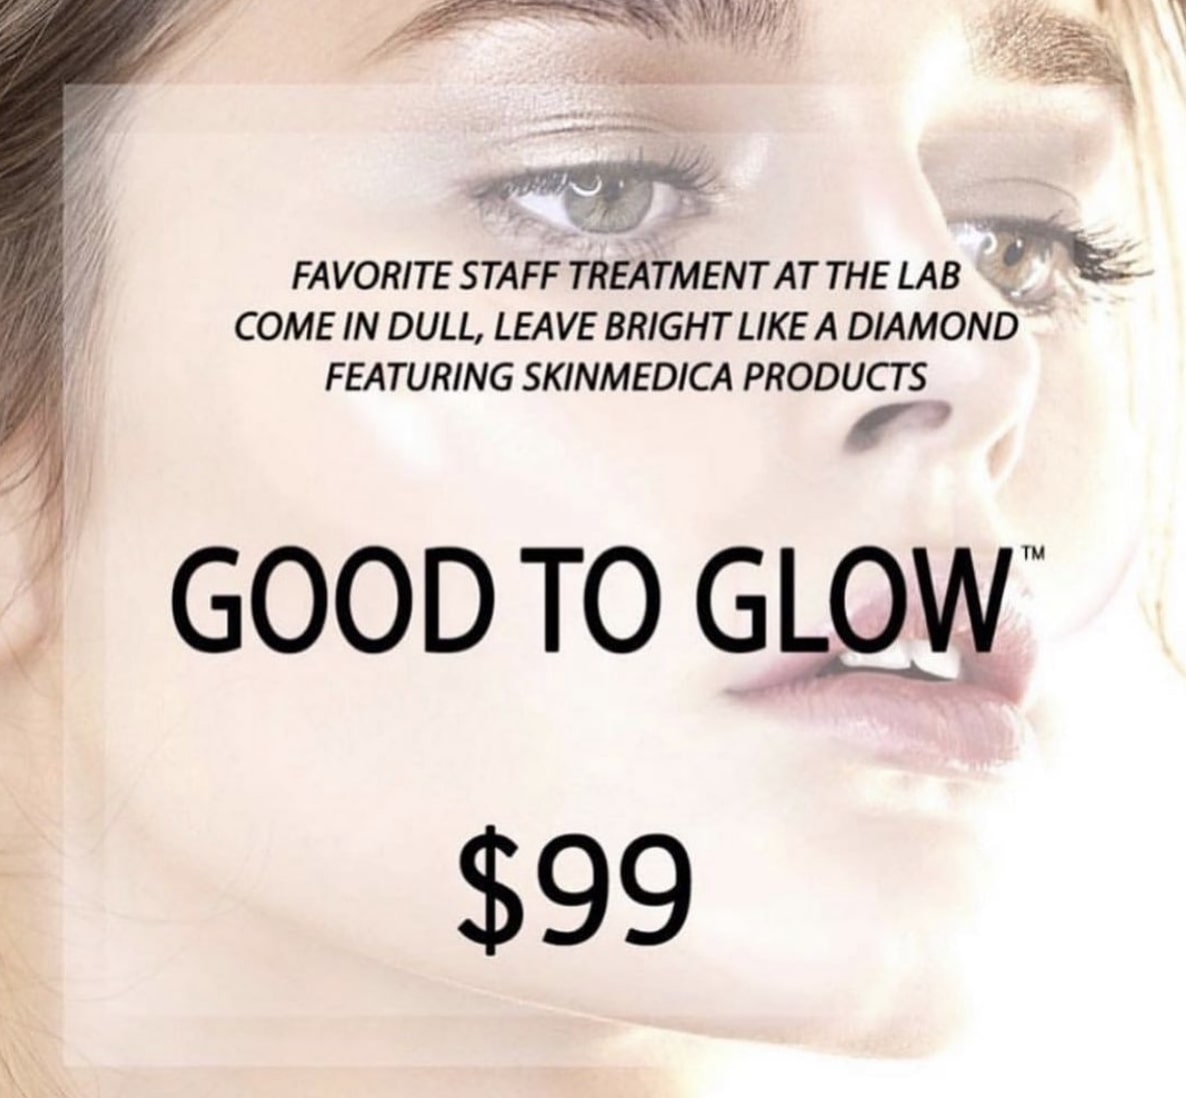 good-to-glow-ut-beauty-lab-and-laser